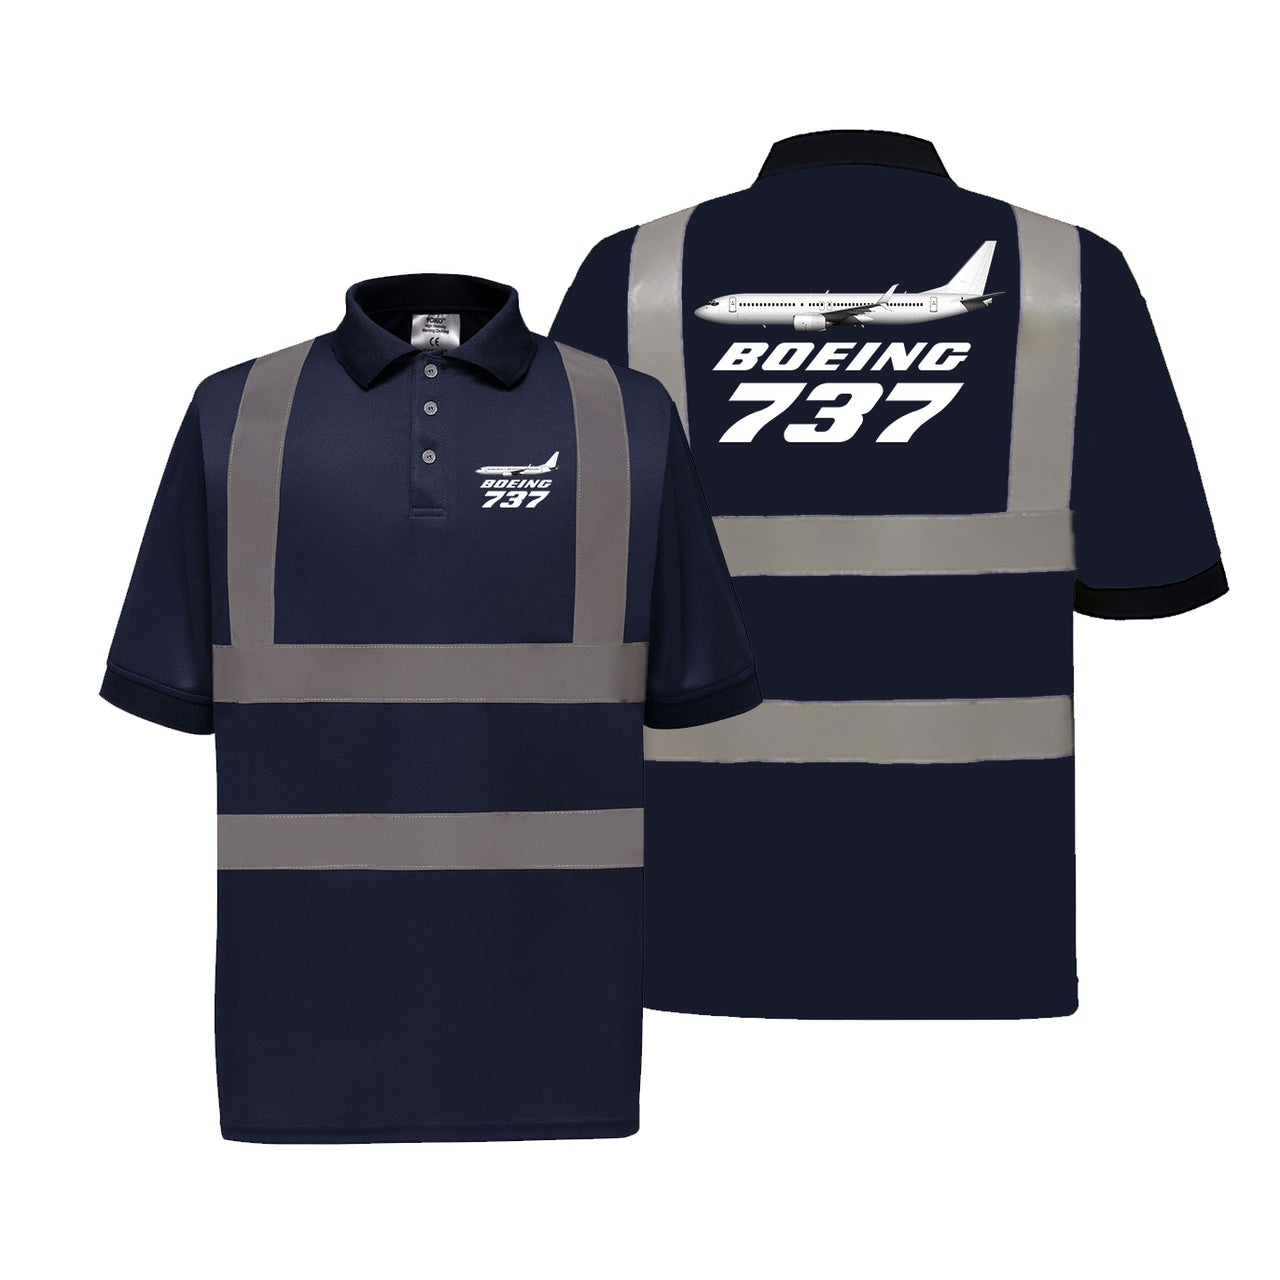 The Boeing 737 Designed Reflective Polo T-Shirts